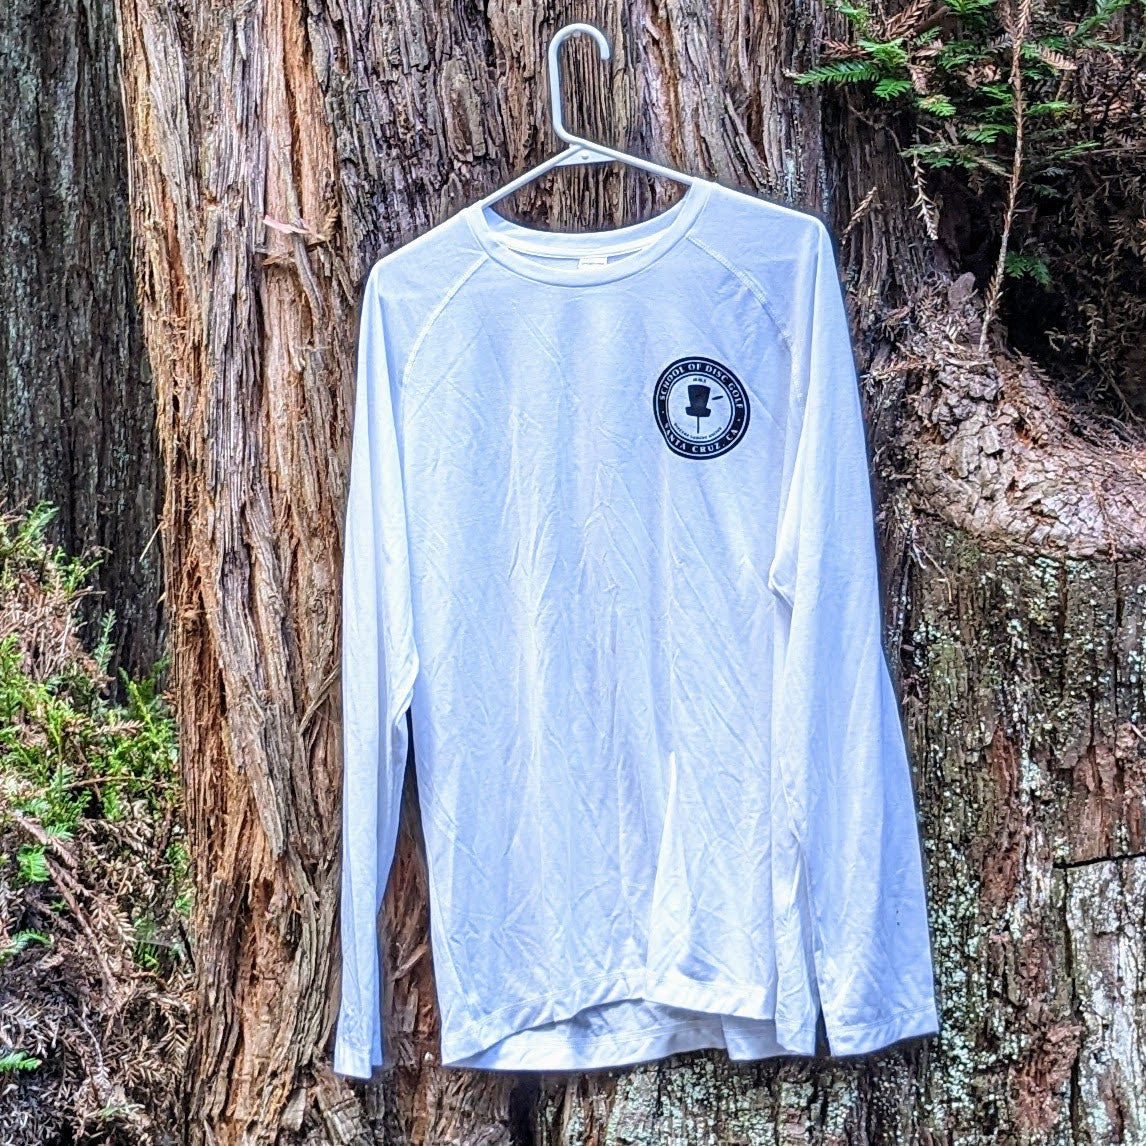 Clearance- White Long Sleeve with School of DisGolf Logo- Size XL